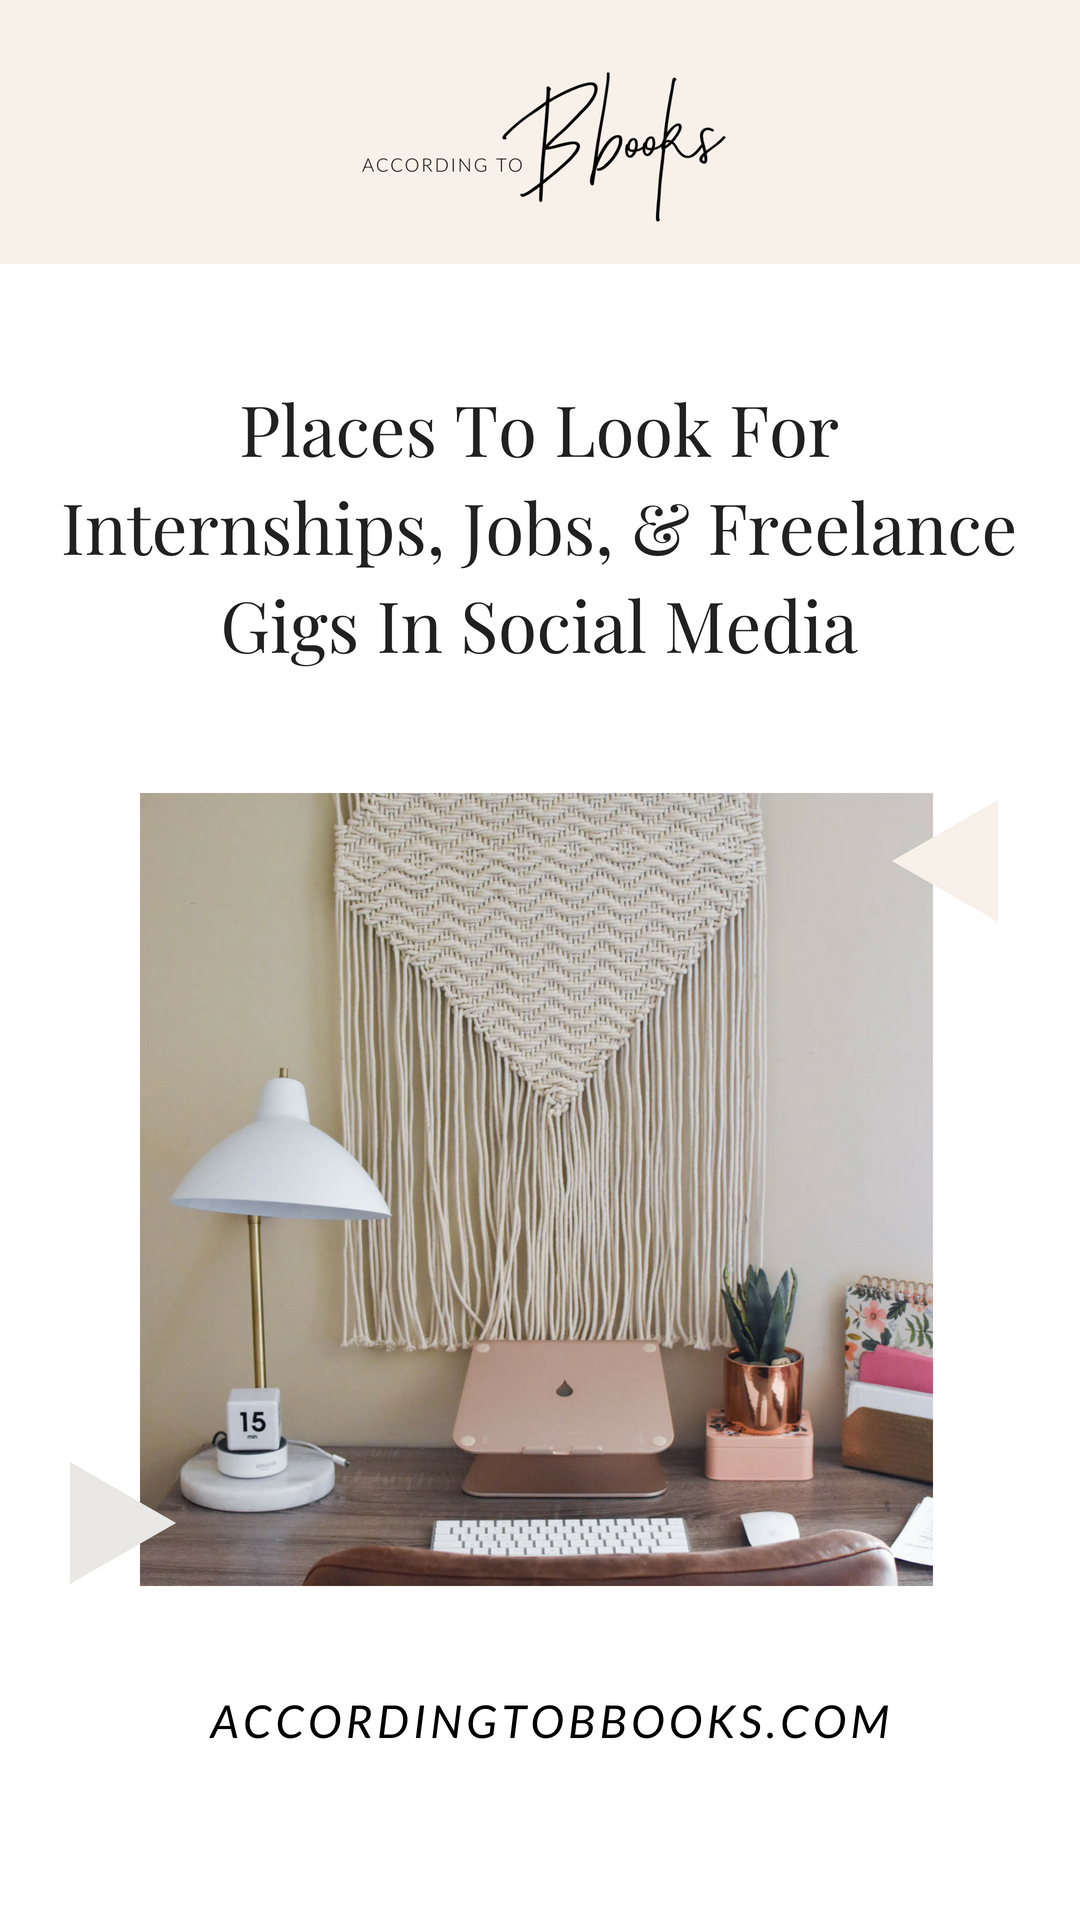 Places To Look For Internships Jobs Freelance Gigs In